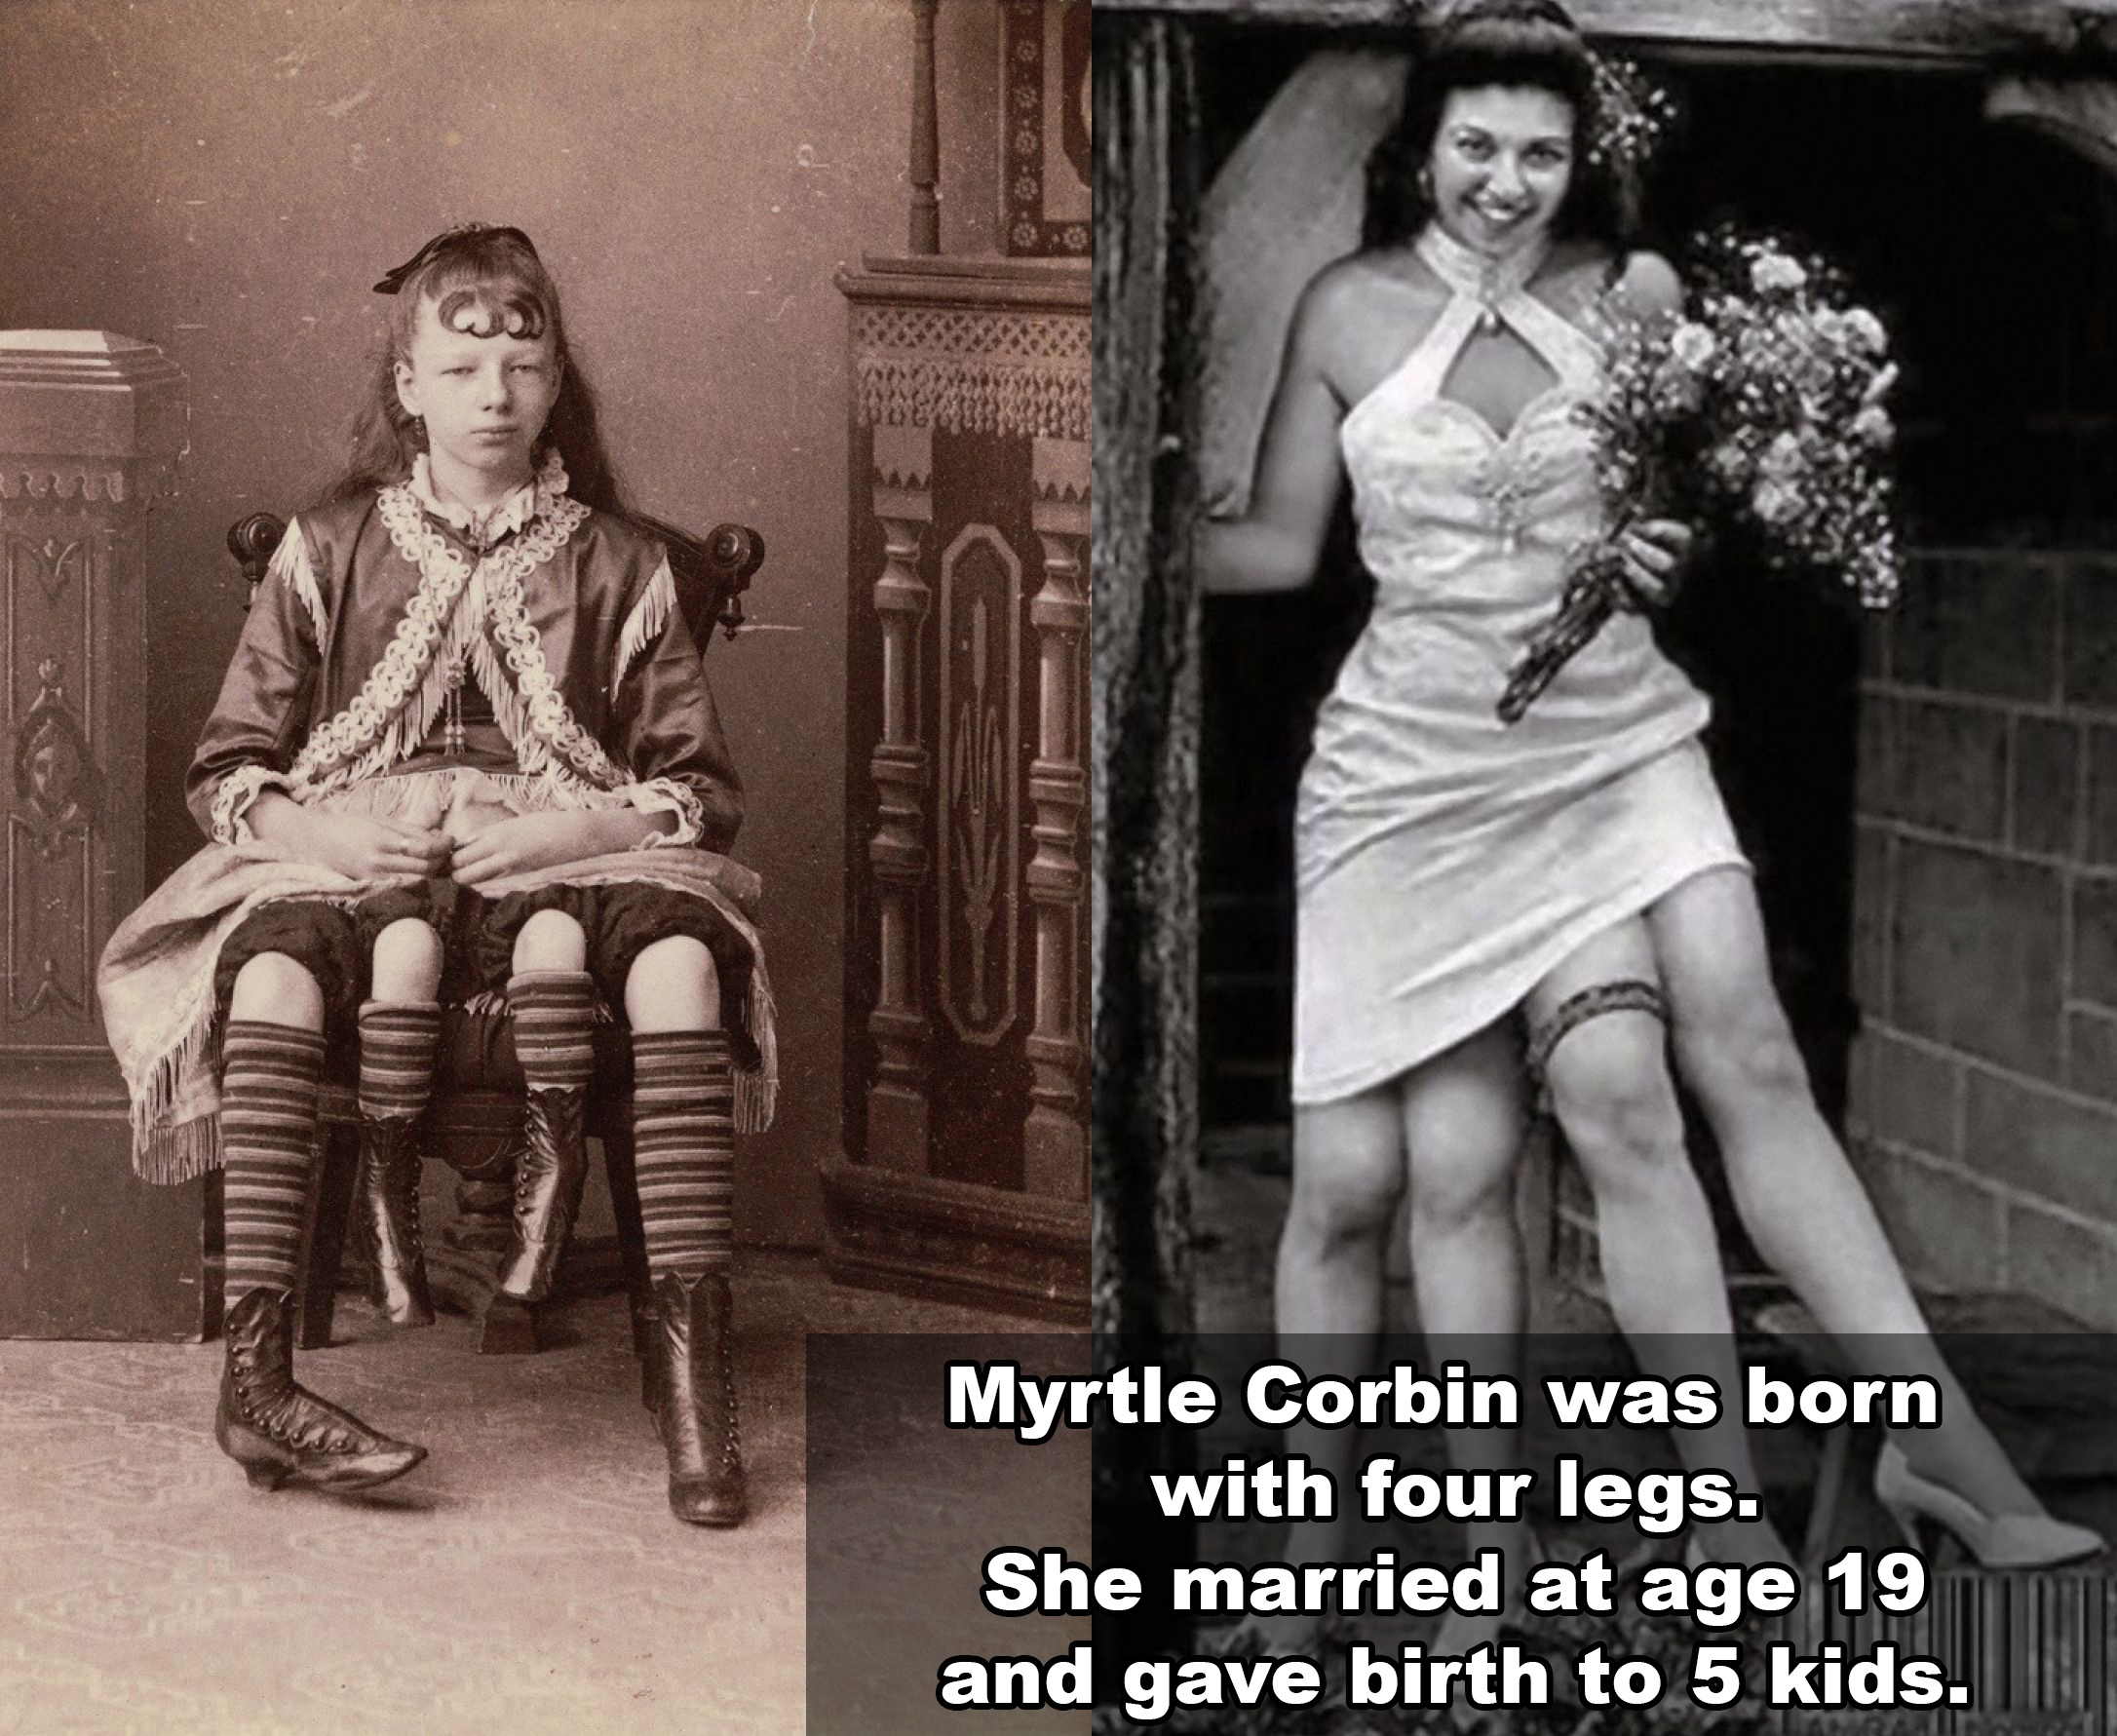 human skeleton barnum - Myrtle Corbin was born with four legs. She married at age 19 and gave birth to 5 kids.